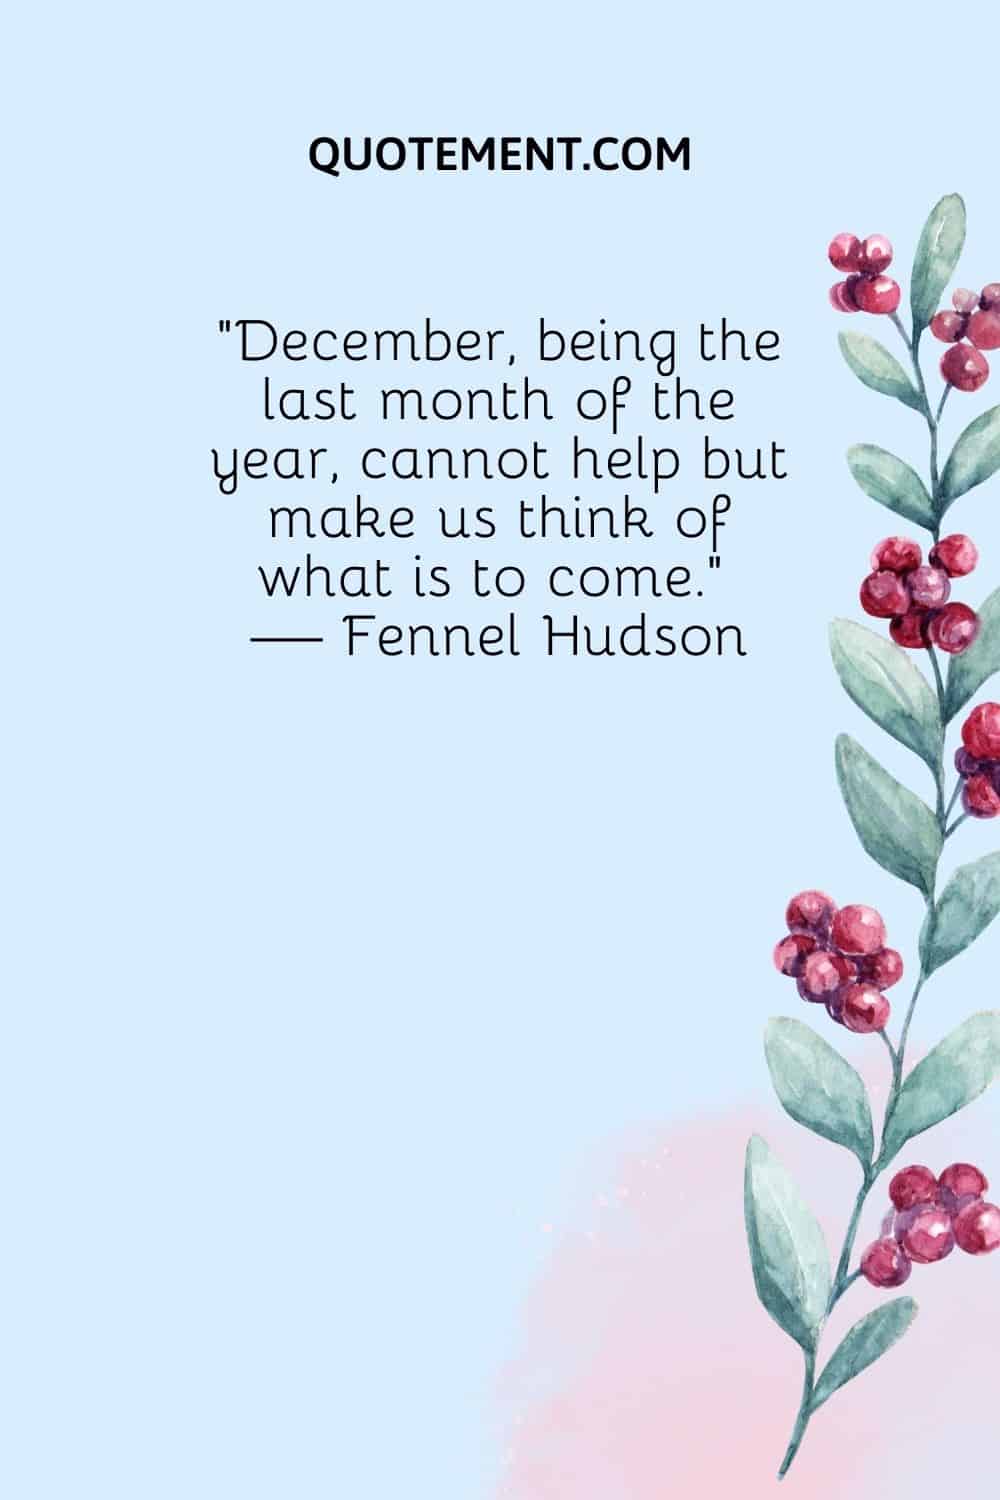 “December, being the last month of the year, cannot help but make us think of what is to come.” — Fennel Hudson